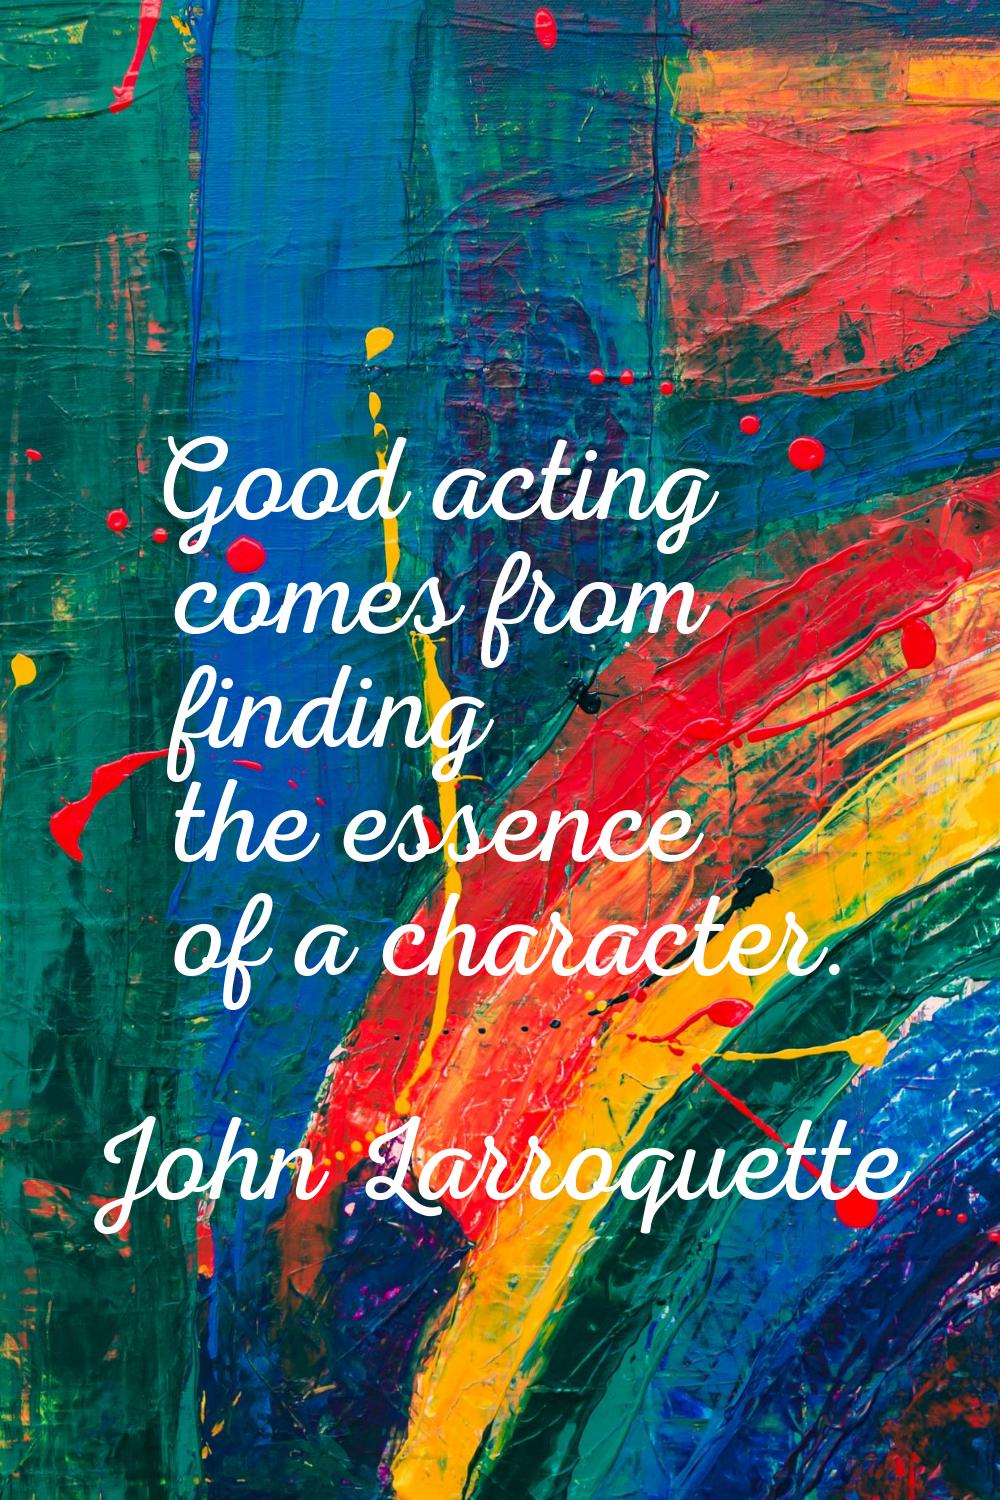 Good acting comes from finding the essence of a character.